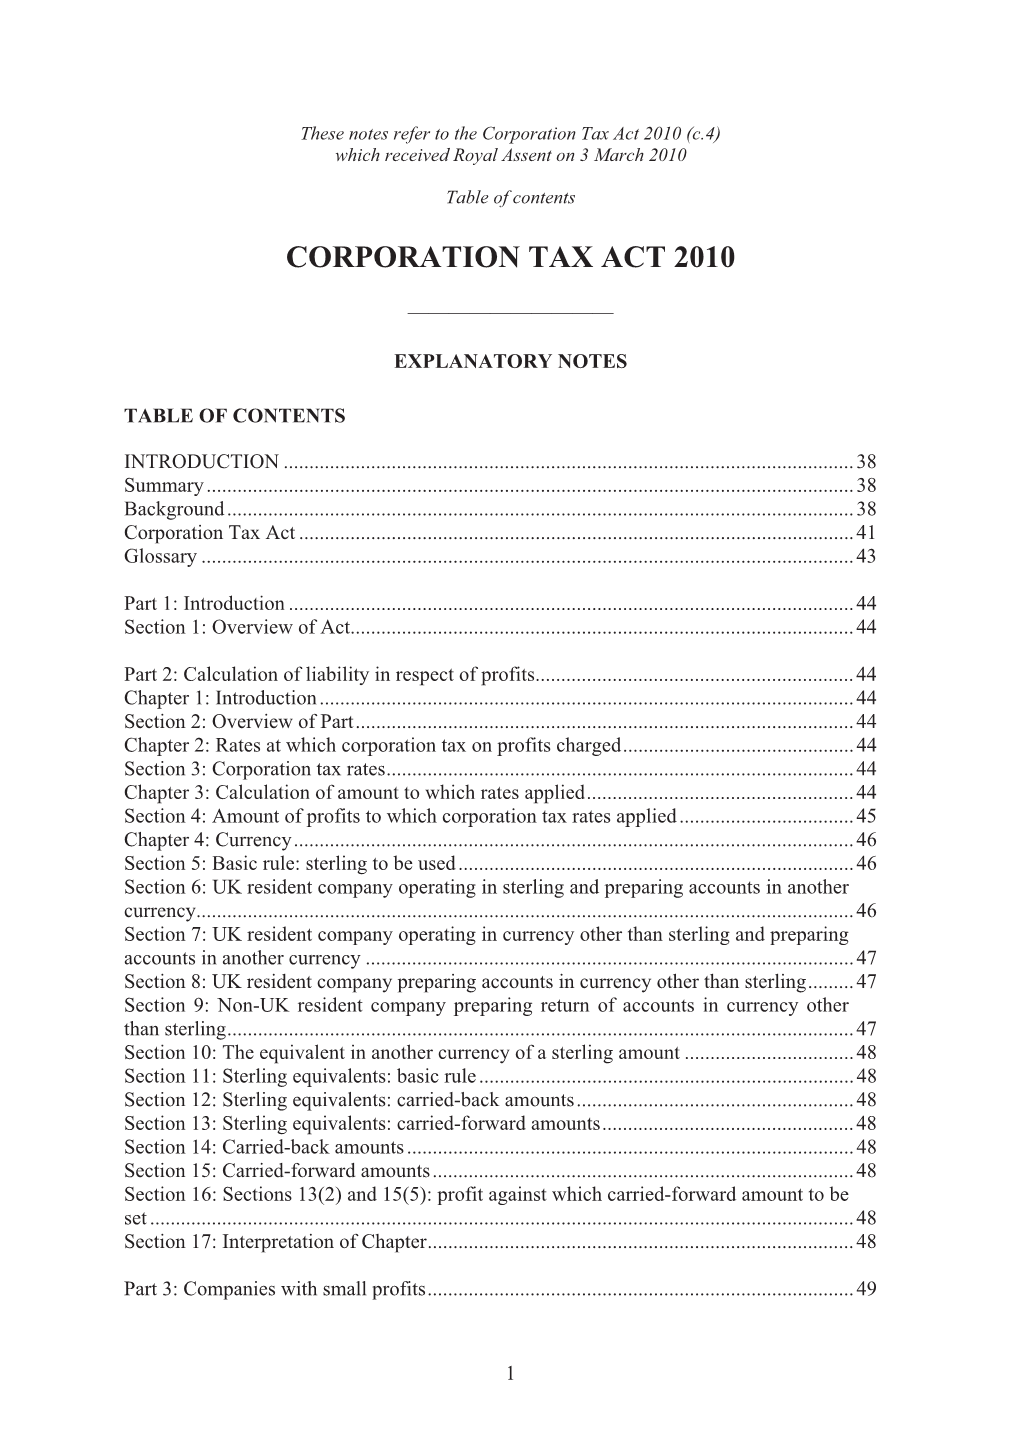 Corporation Tax Act 2010 (C.4) Which Received Royal Assent on 3 March 2010